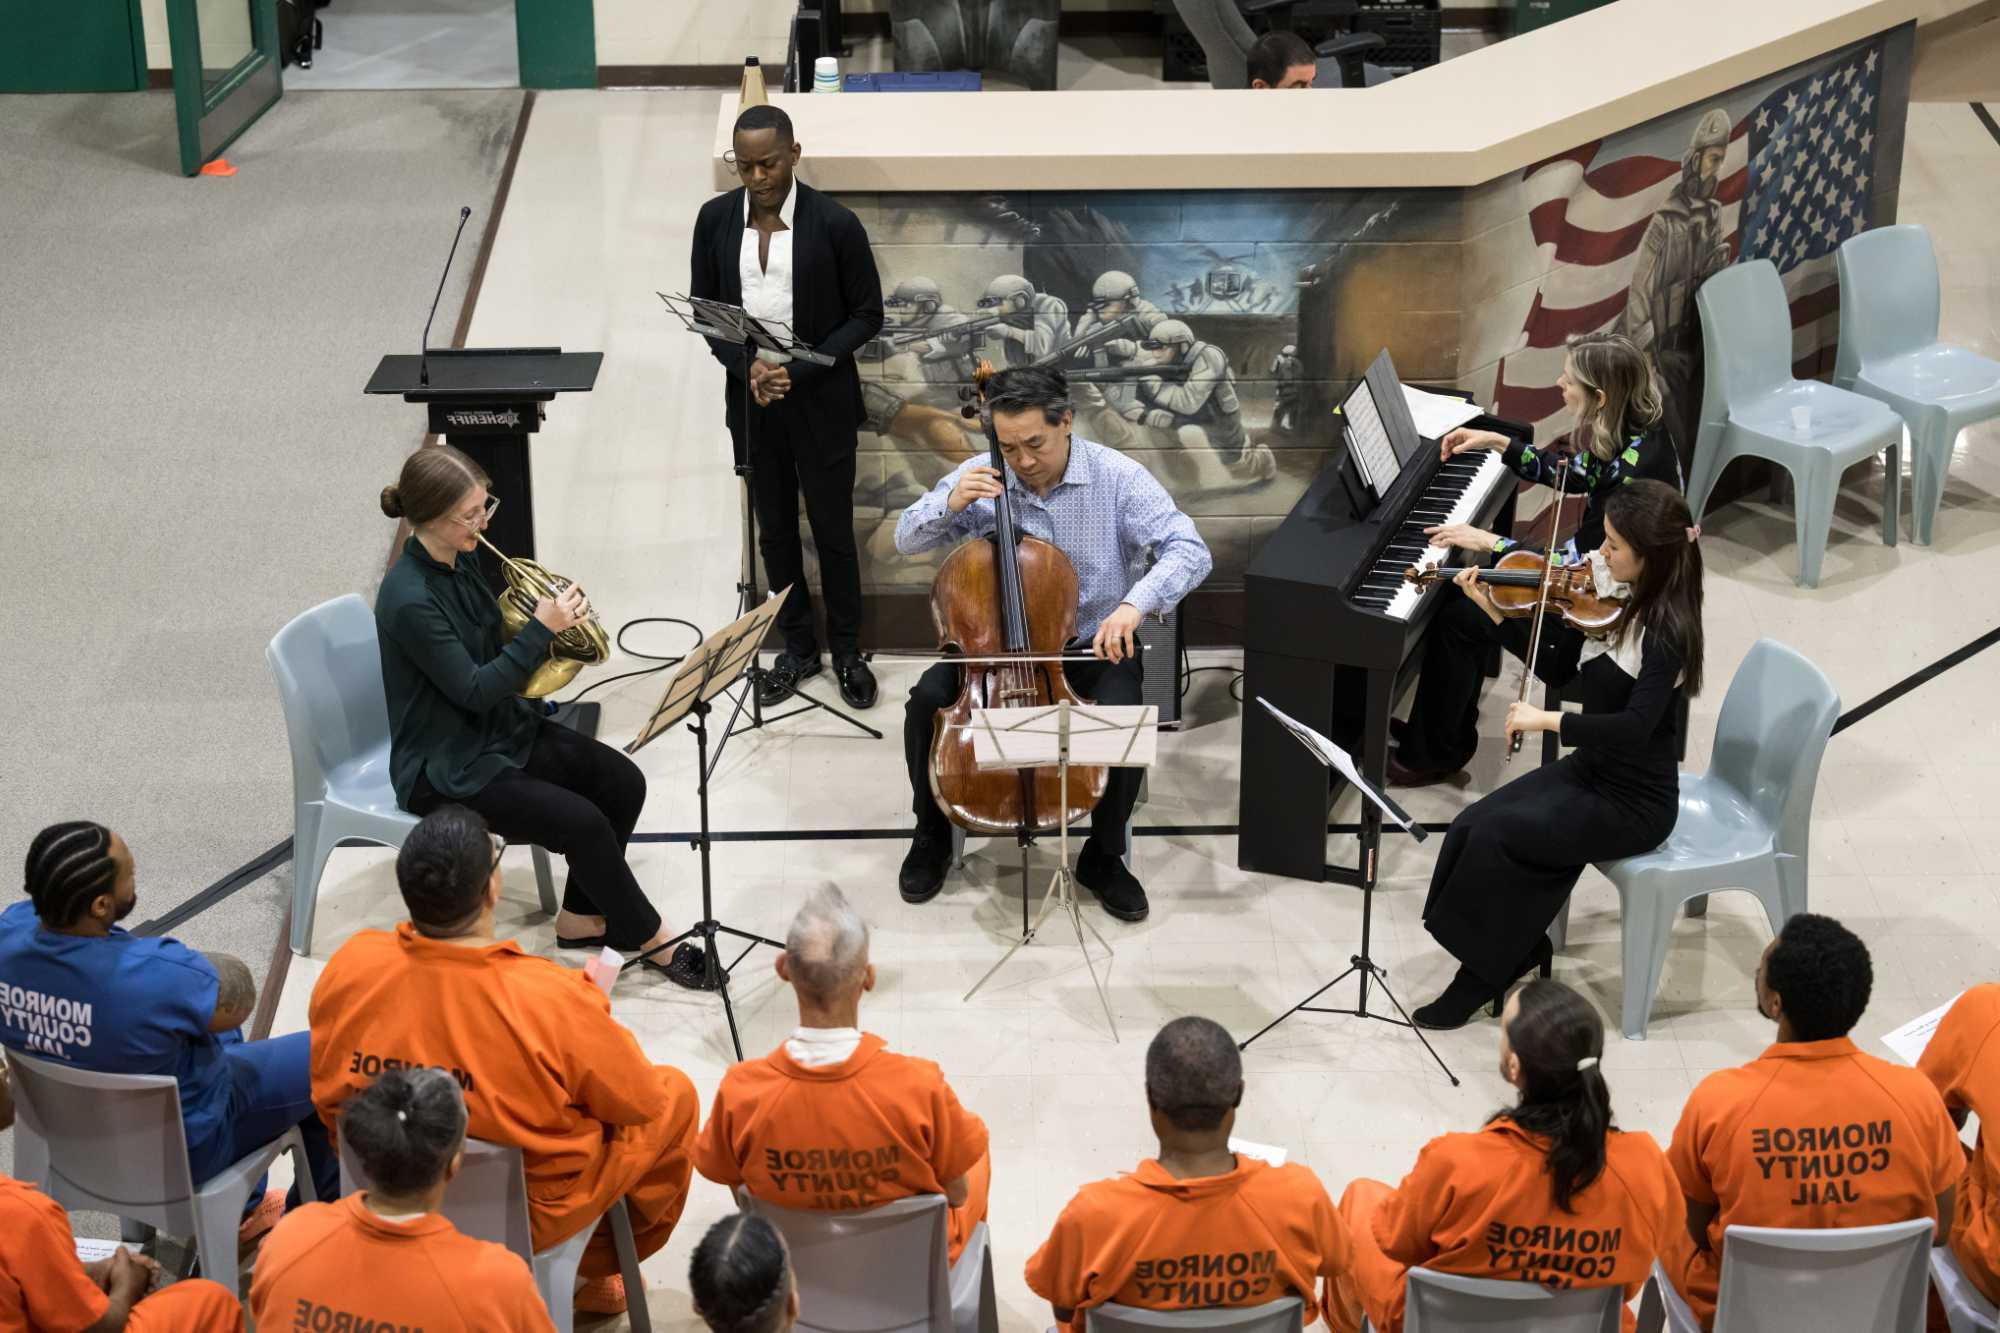 ROC City Concert musicians play their classical music instruments for incarcerated people who are seen from behind.